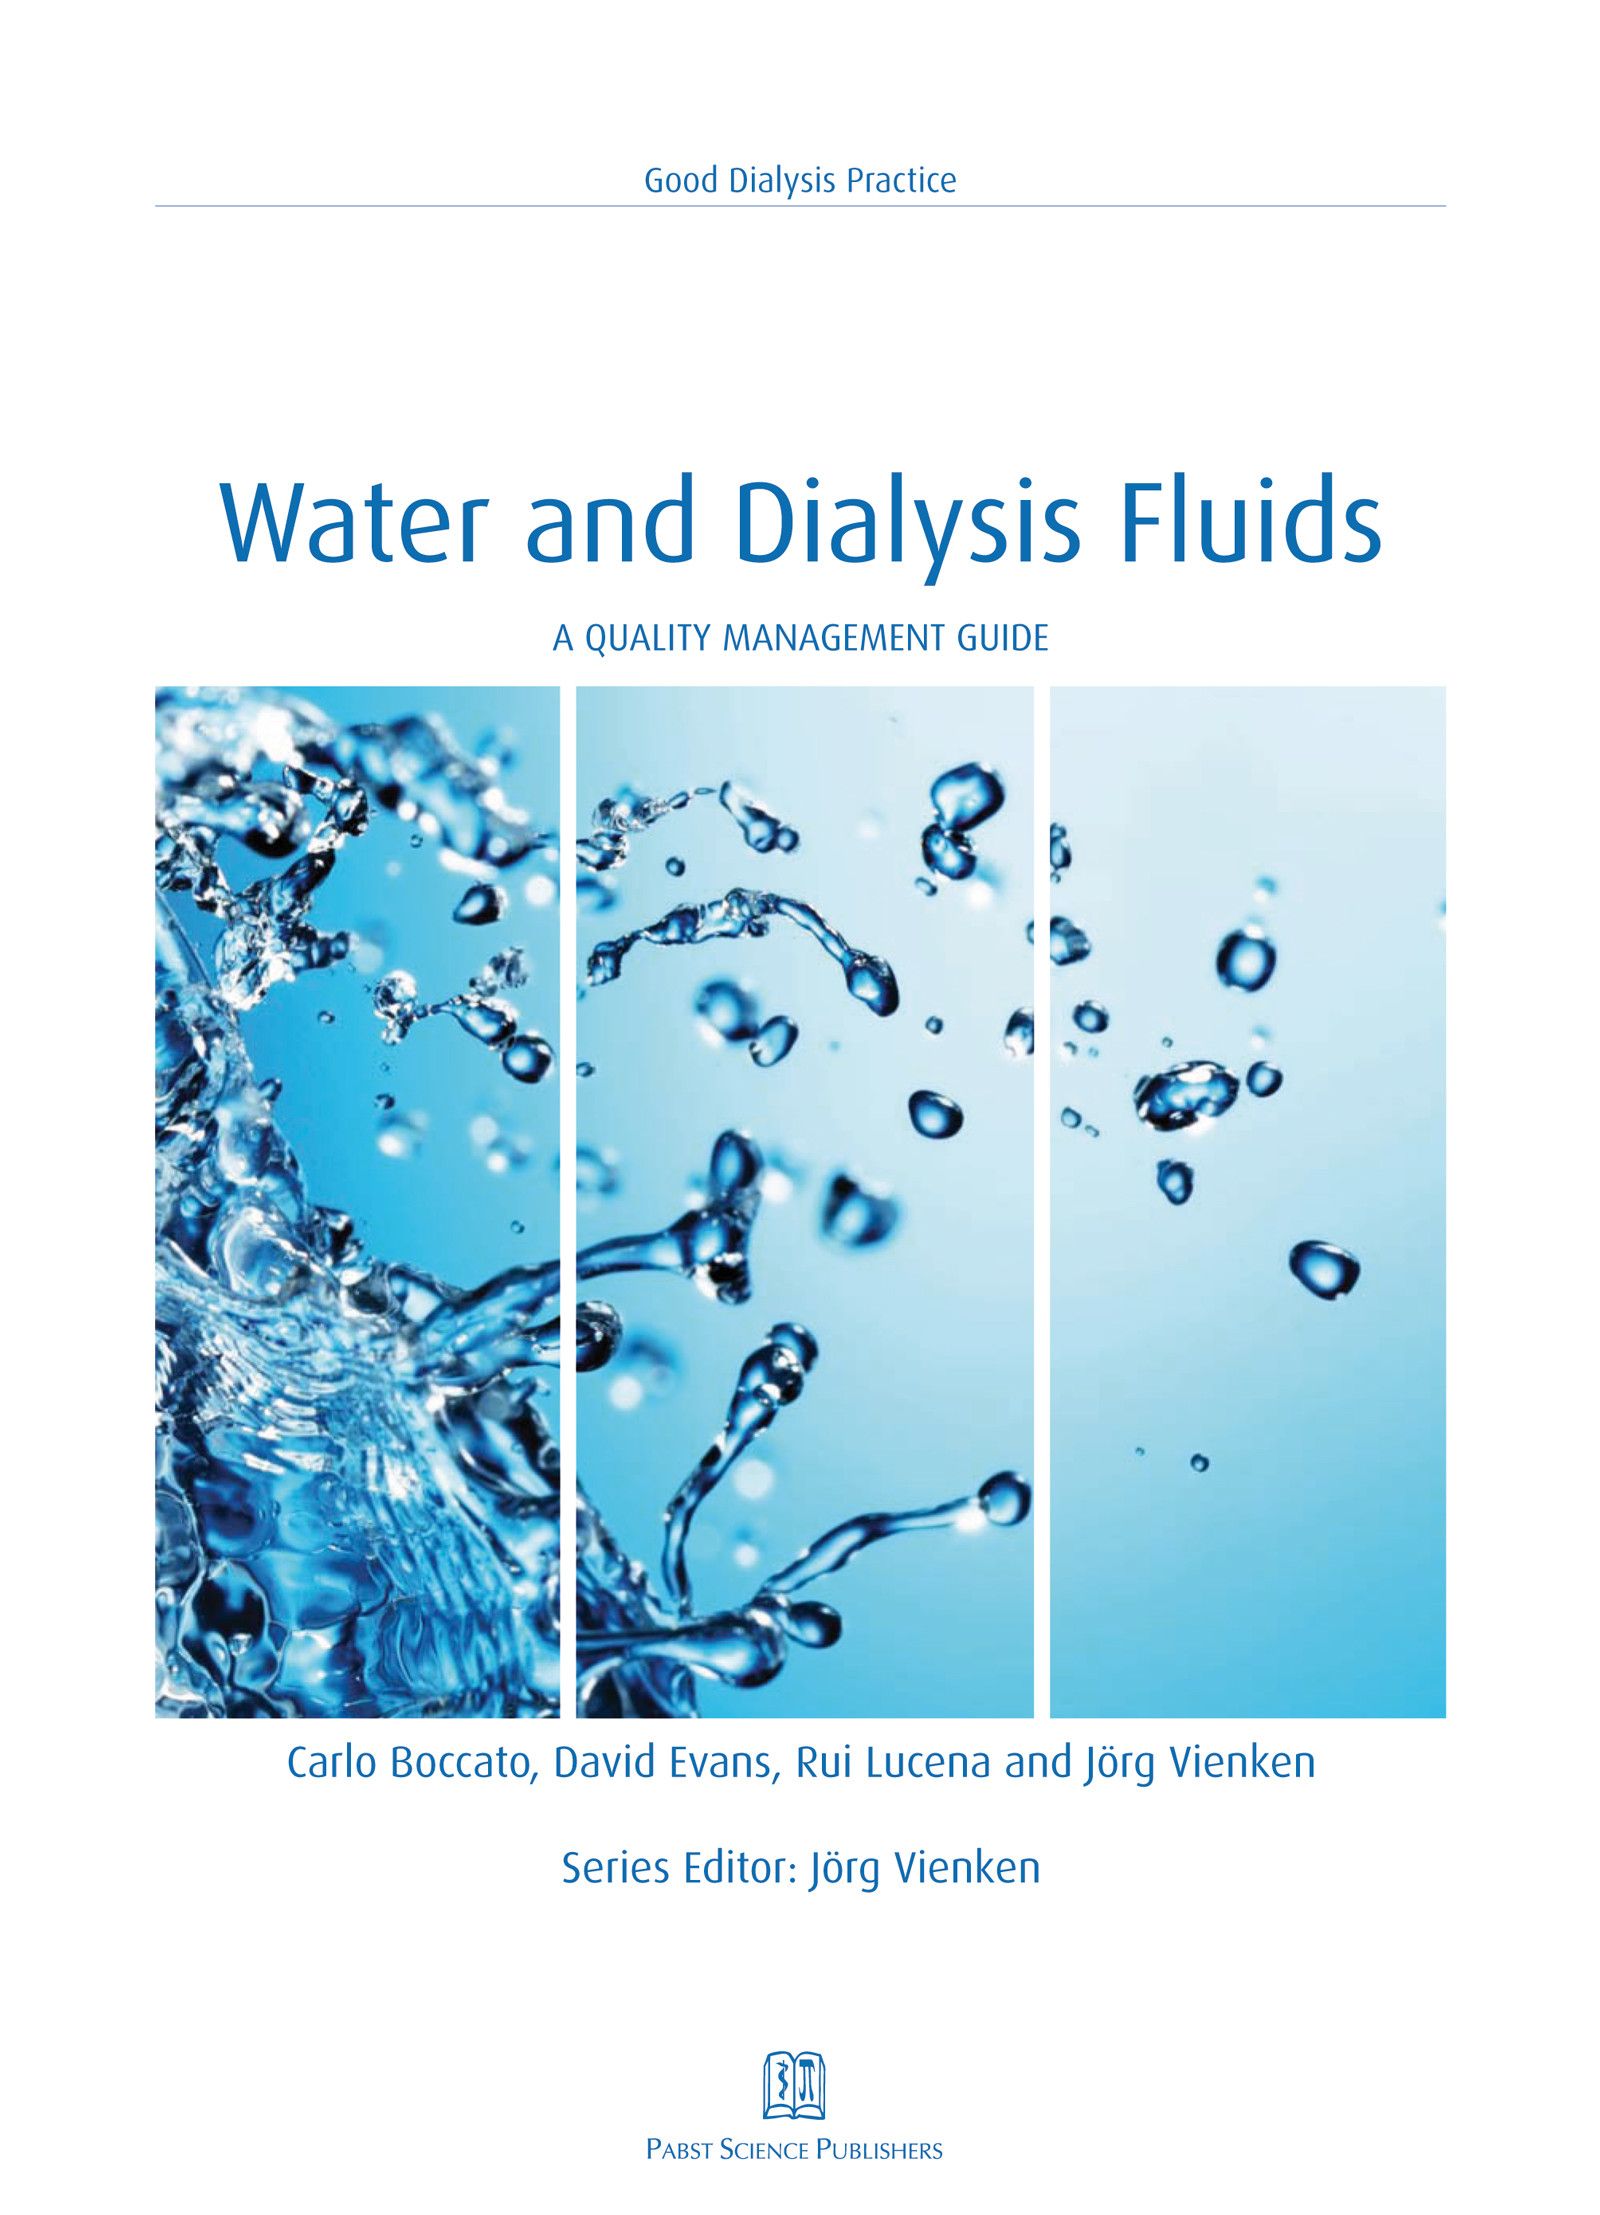 Water and Dialysis Fluids